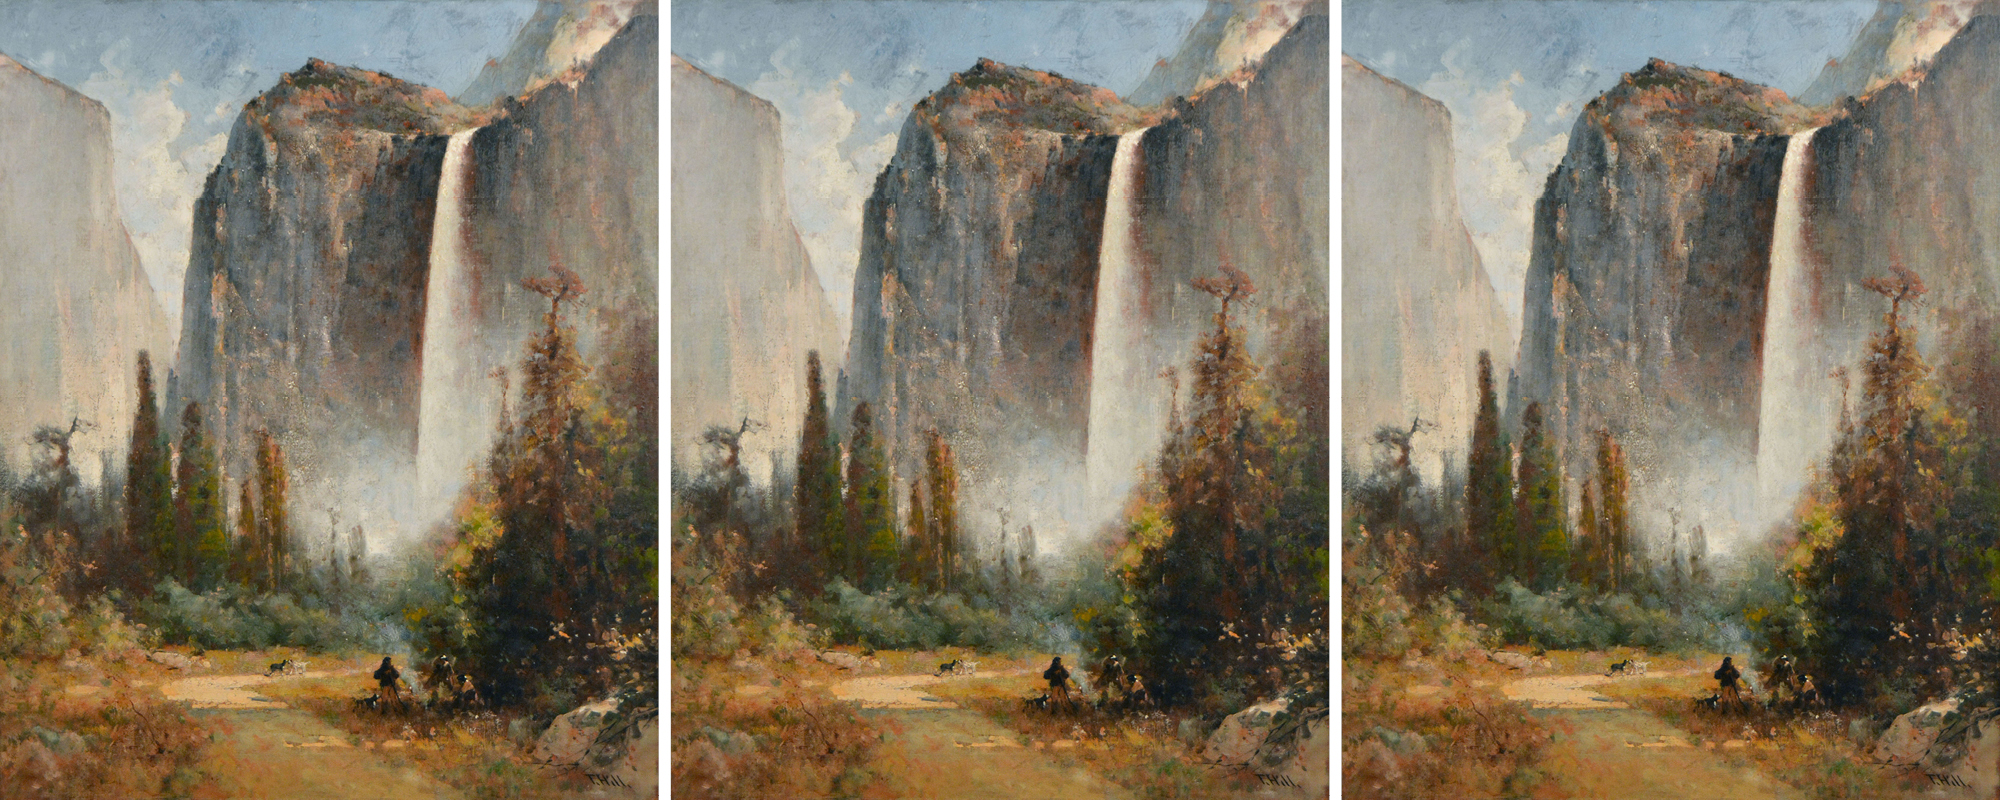 Painting of a mountain scene. Trees, people, and dogs are below on the ground. The mountain takes up 75% of the canvas. Image repeats three times.